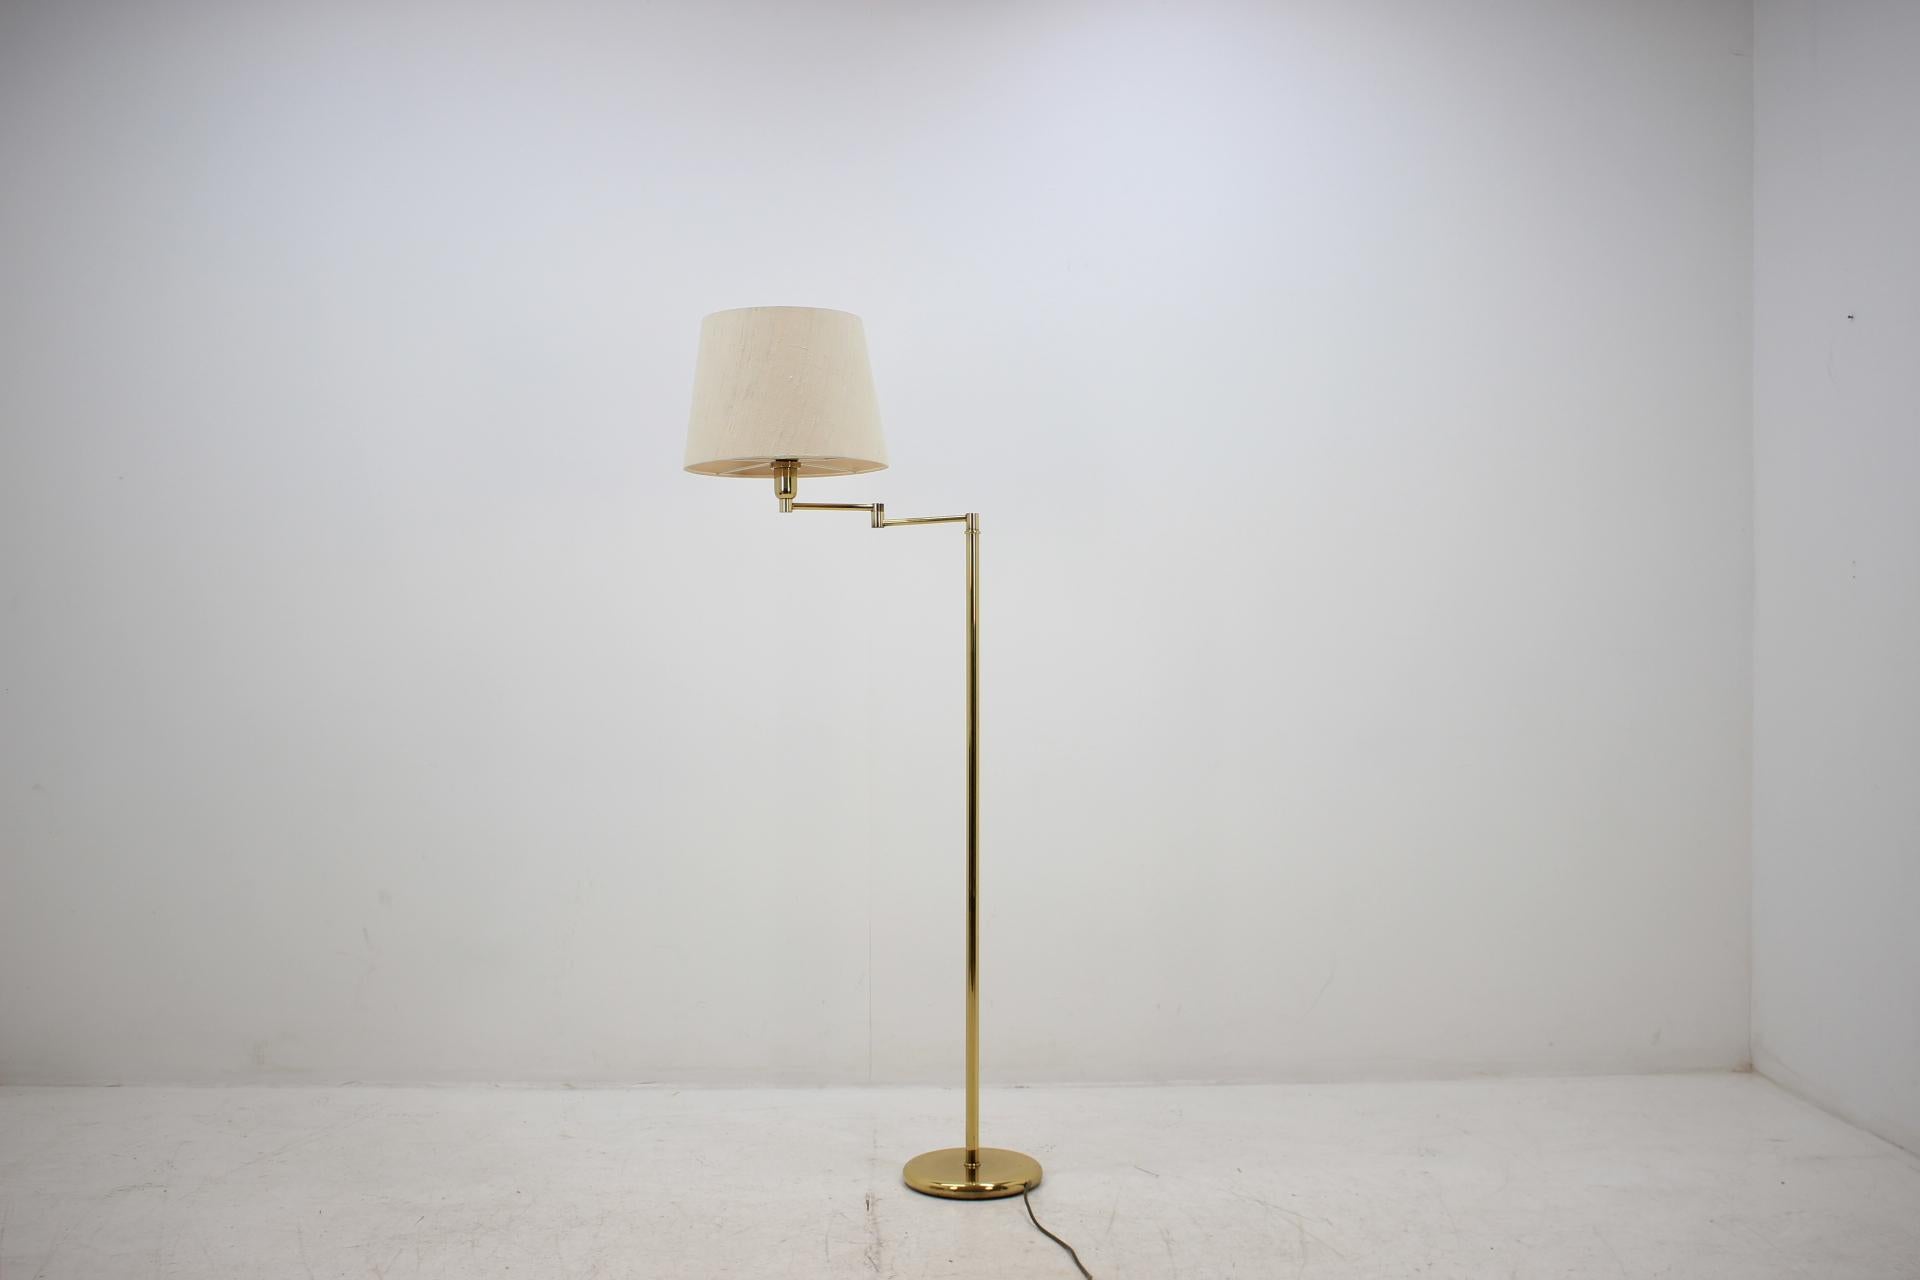 - Brass, textile lampshade.
- Made in Germany. 
-Original fully functional condition.